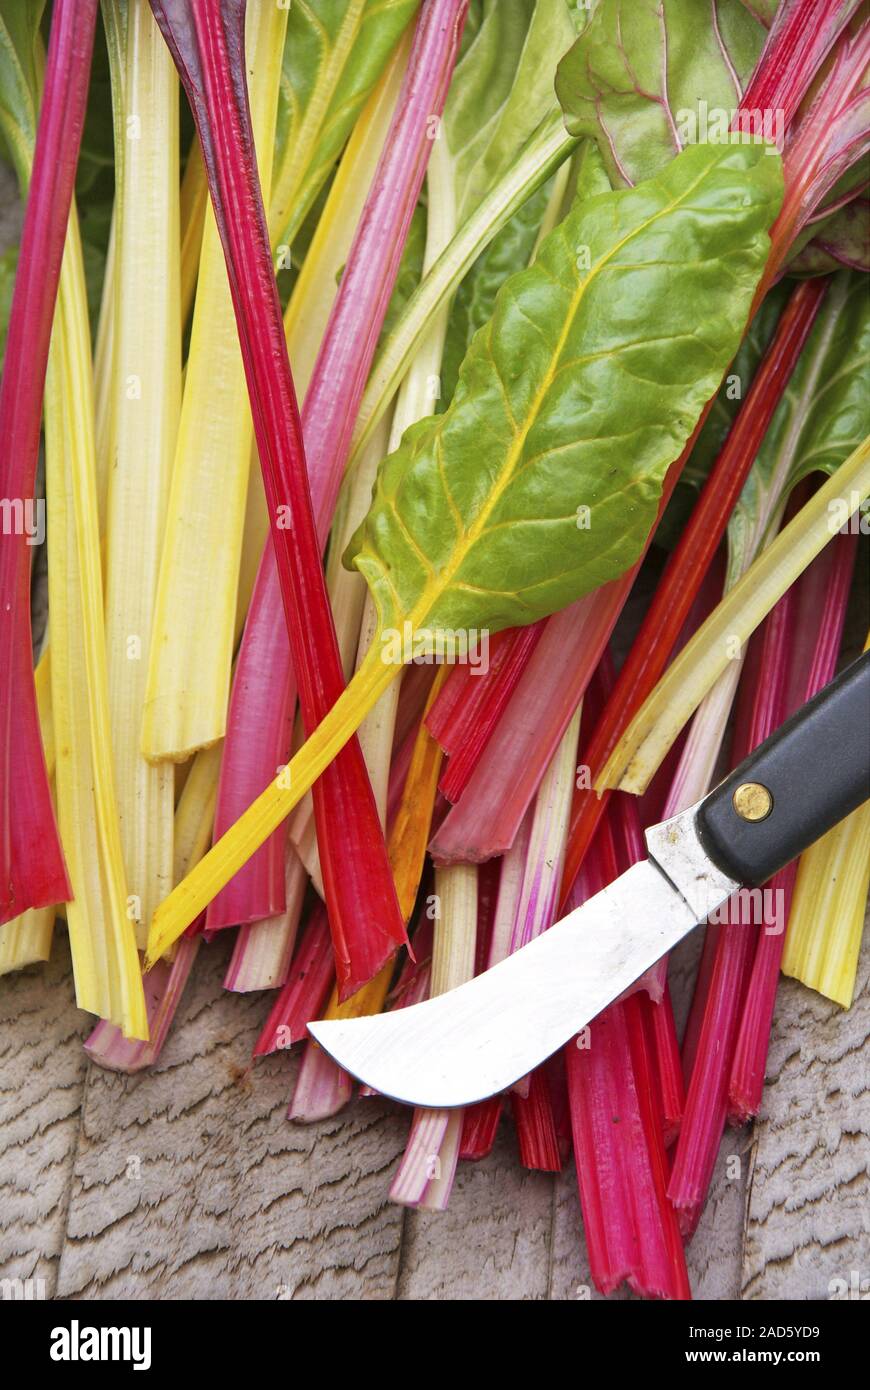 Freshly harvested Colorful chard (Beta vulgaris subsp. Cicla var. Flavescens) 'Bright Lights' and a billhook in a wooden basket UK + IRISH RIGHTS ONLY Stock Photo